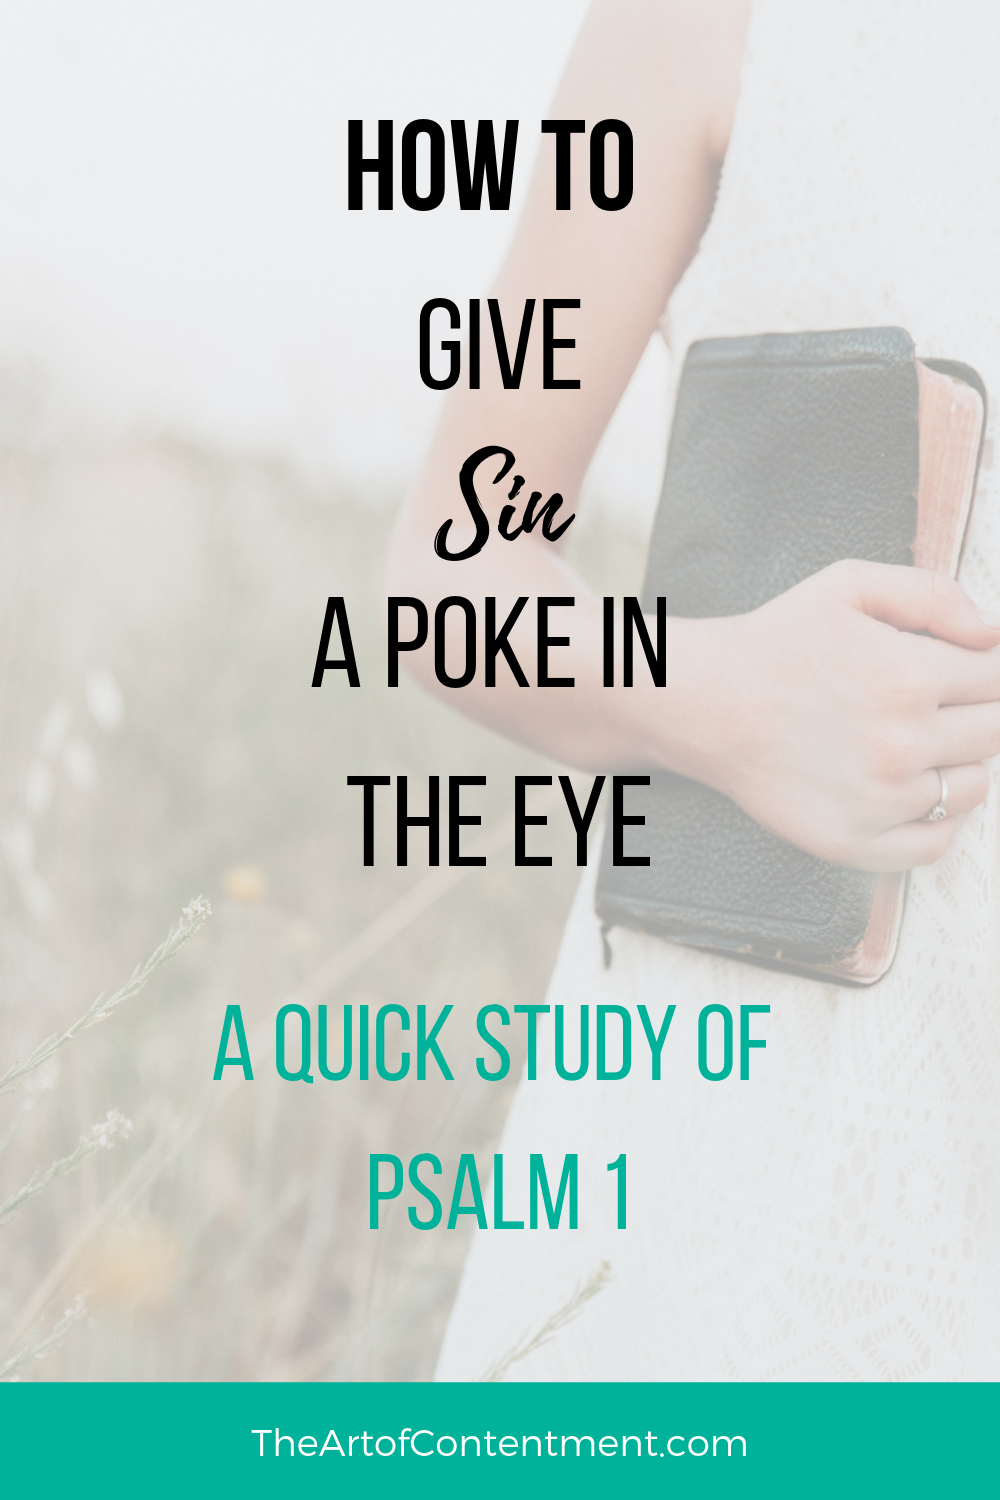 Do you get in trouble by taking bad advice from good people? Or say things you shouldn't? In Psalm 1, King David shows us a simple but effective way to avoid sin: move and plant.